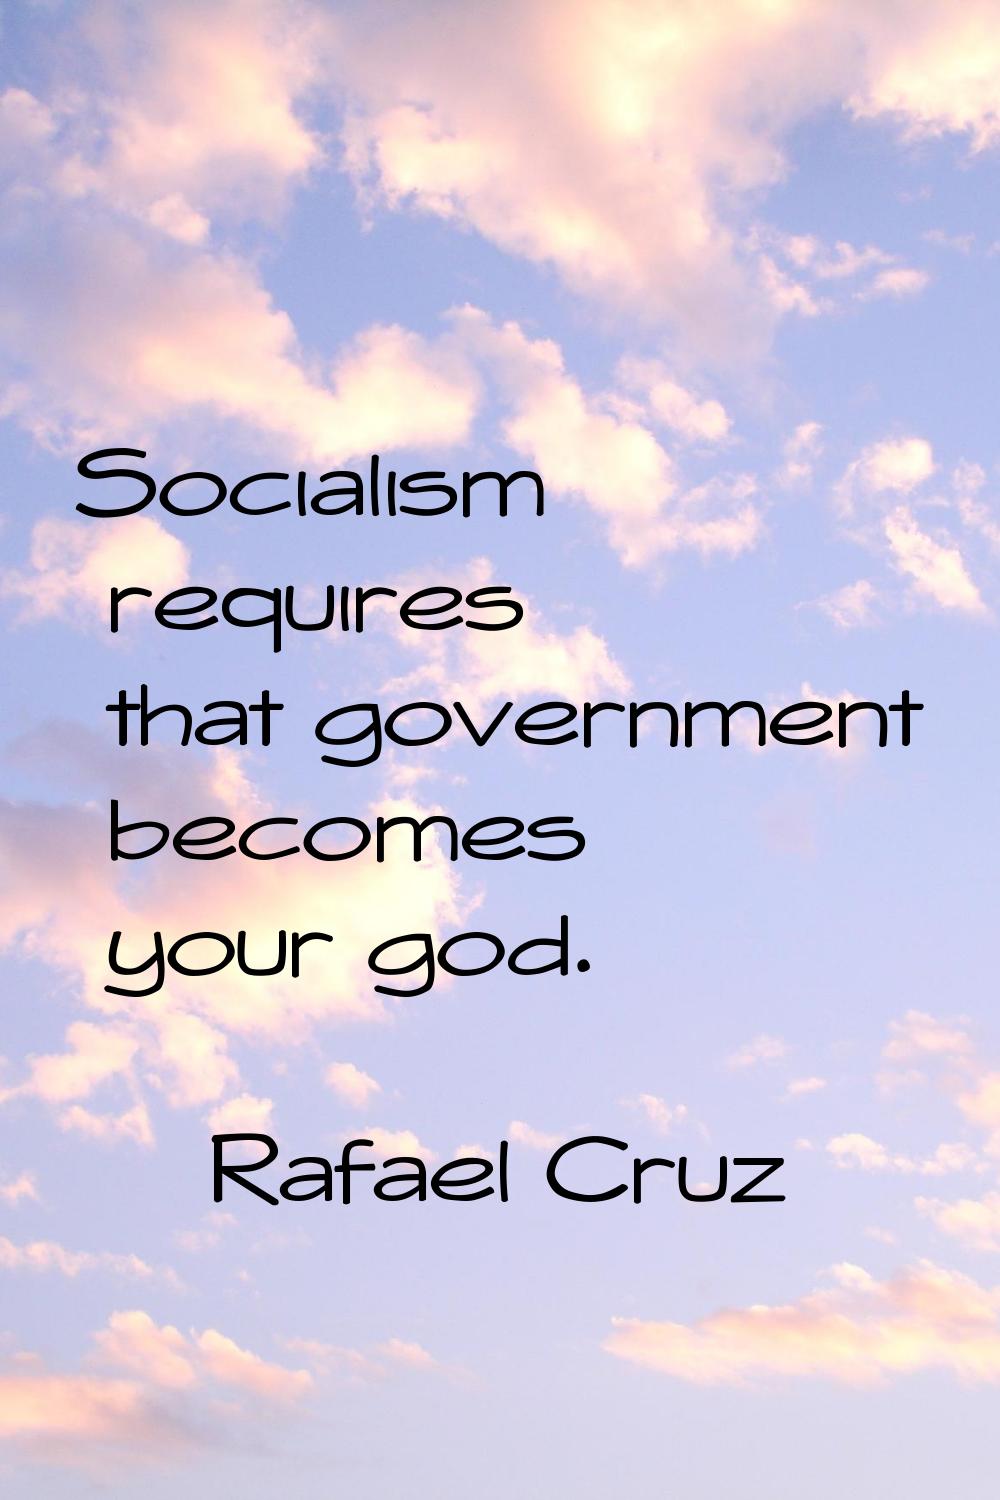 Socialism requires that government becomes your god.